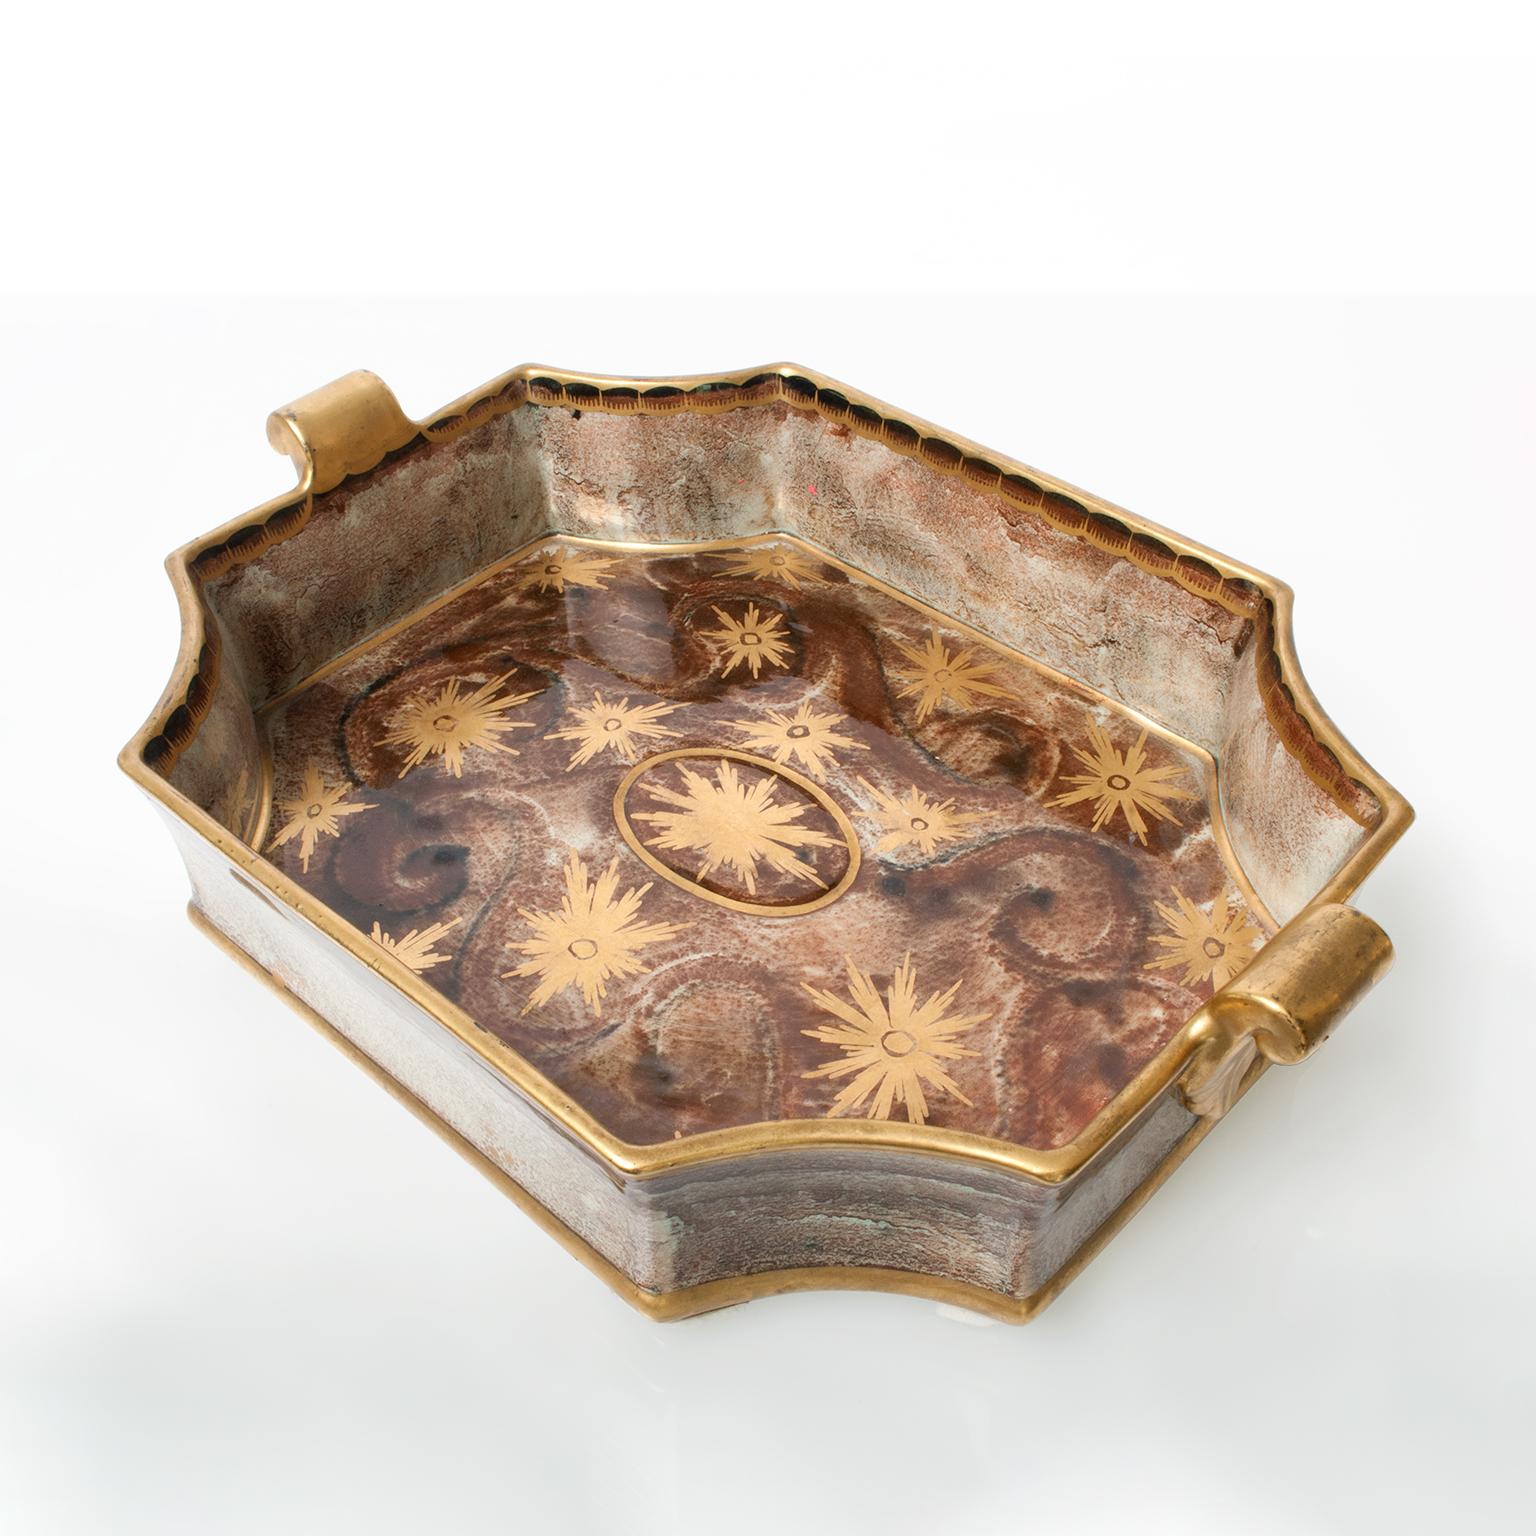 Large Swedish Art Deco tray or bowl with notched corners and handles. Hand decorated with gold glaze over a brown and green luster glaze. Designed by Josef Ekberg for Gustavsberg, signed and dated 1931.